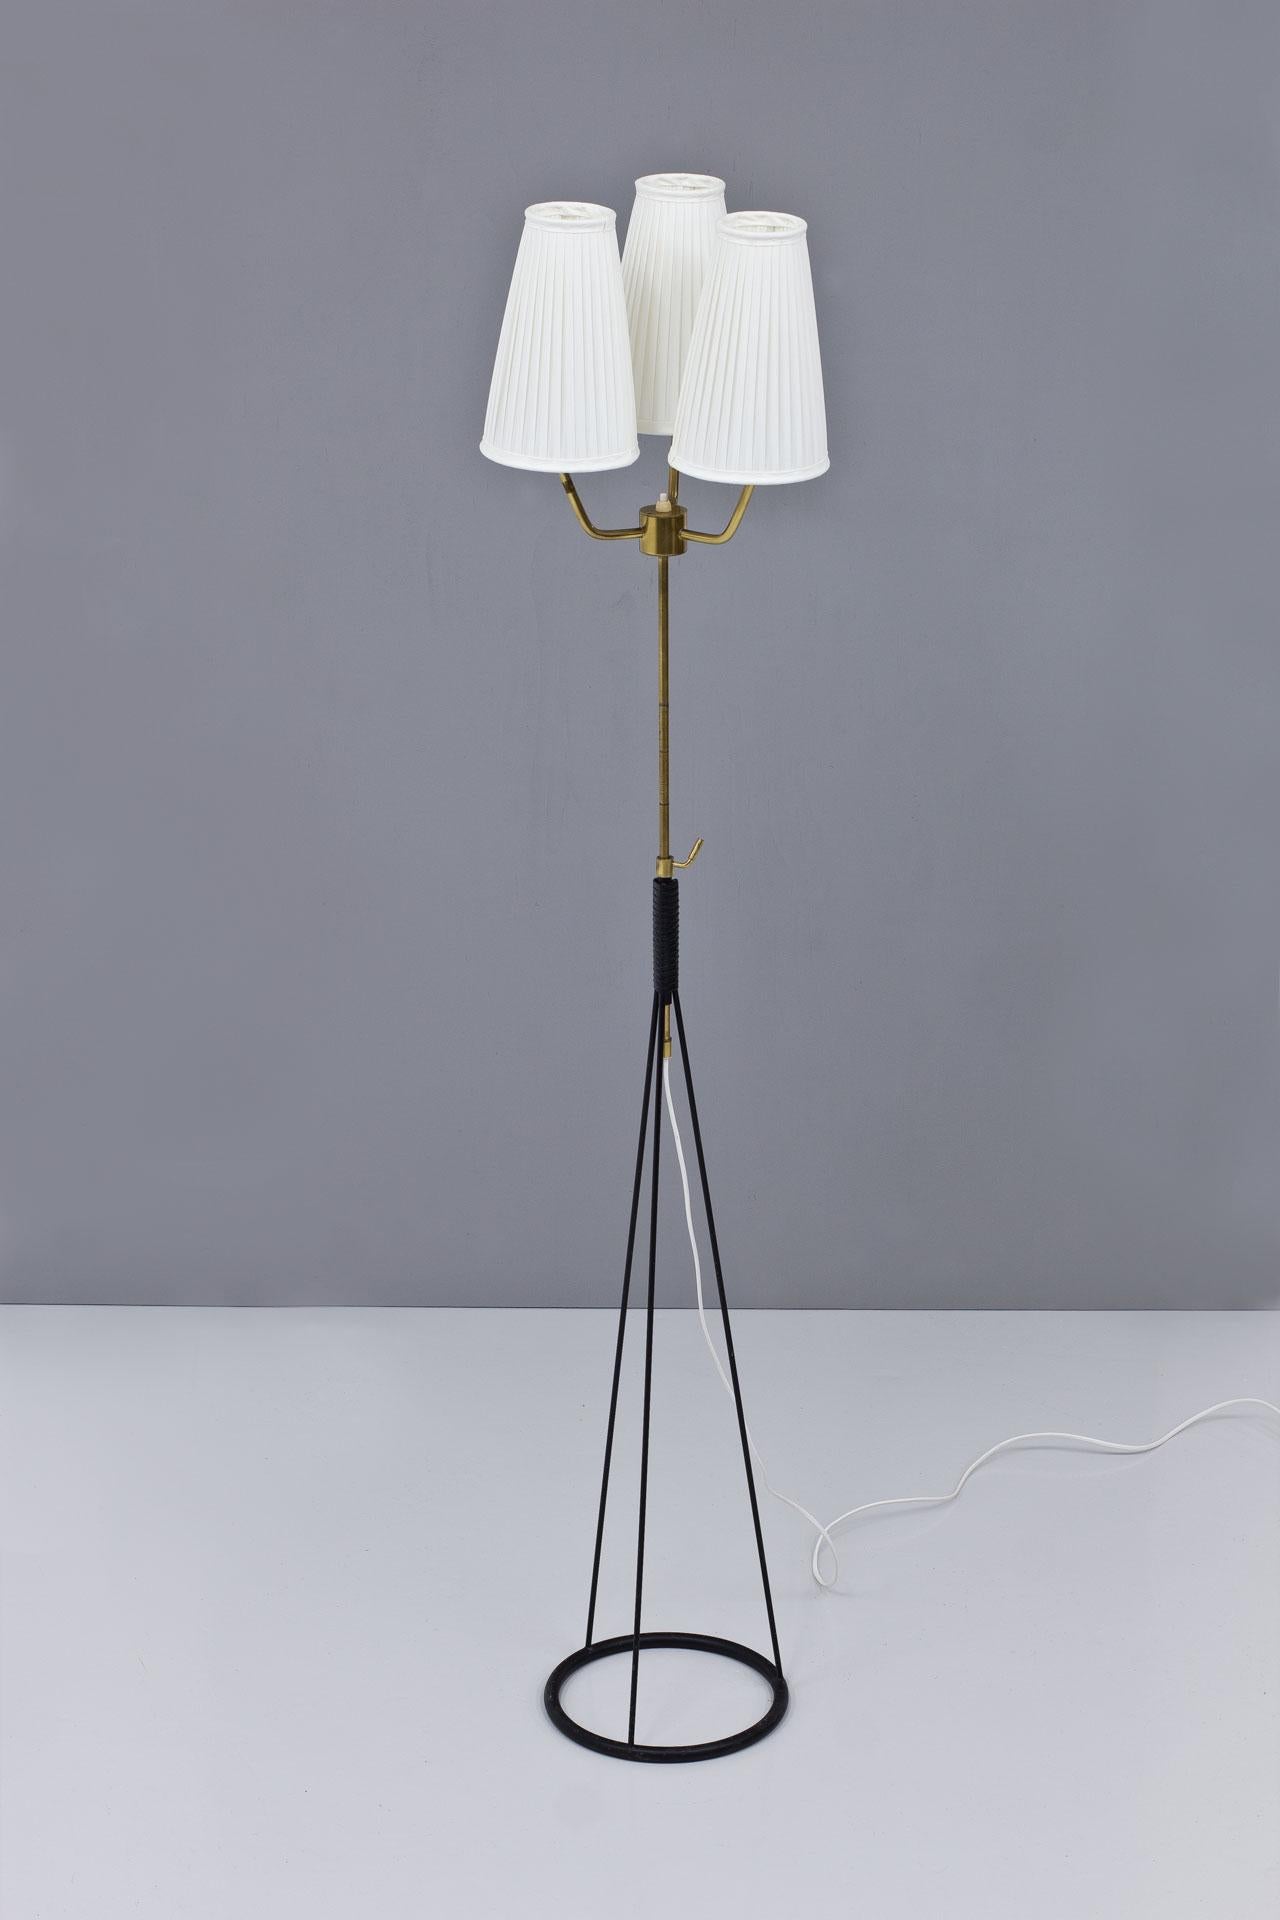 Rare floor lamp designed by Eje Ahlgren, manufactured by AB Luco in Göteborg, Sweden during the 1950s.
Black lacquered metal with brass stem. Original lampshades reupholstered in an off–white chintz pleated fabric. The stem has an adjustable